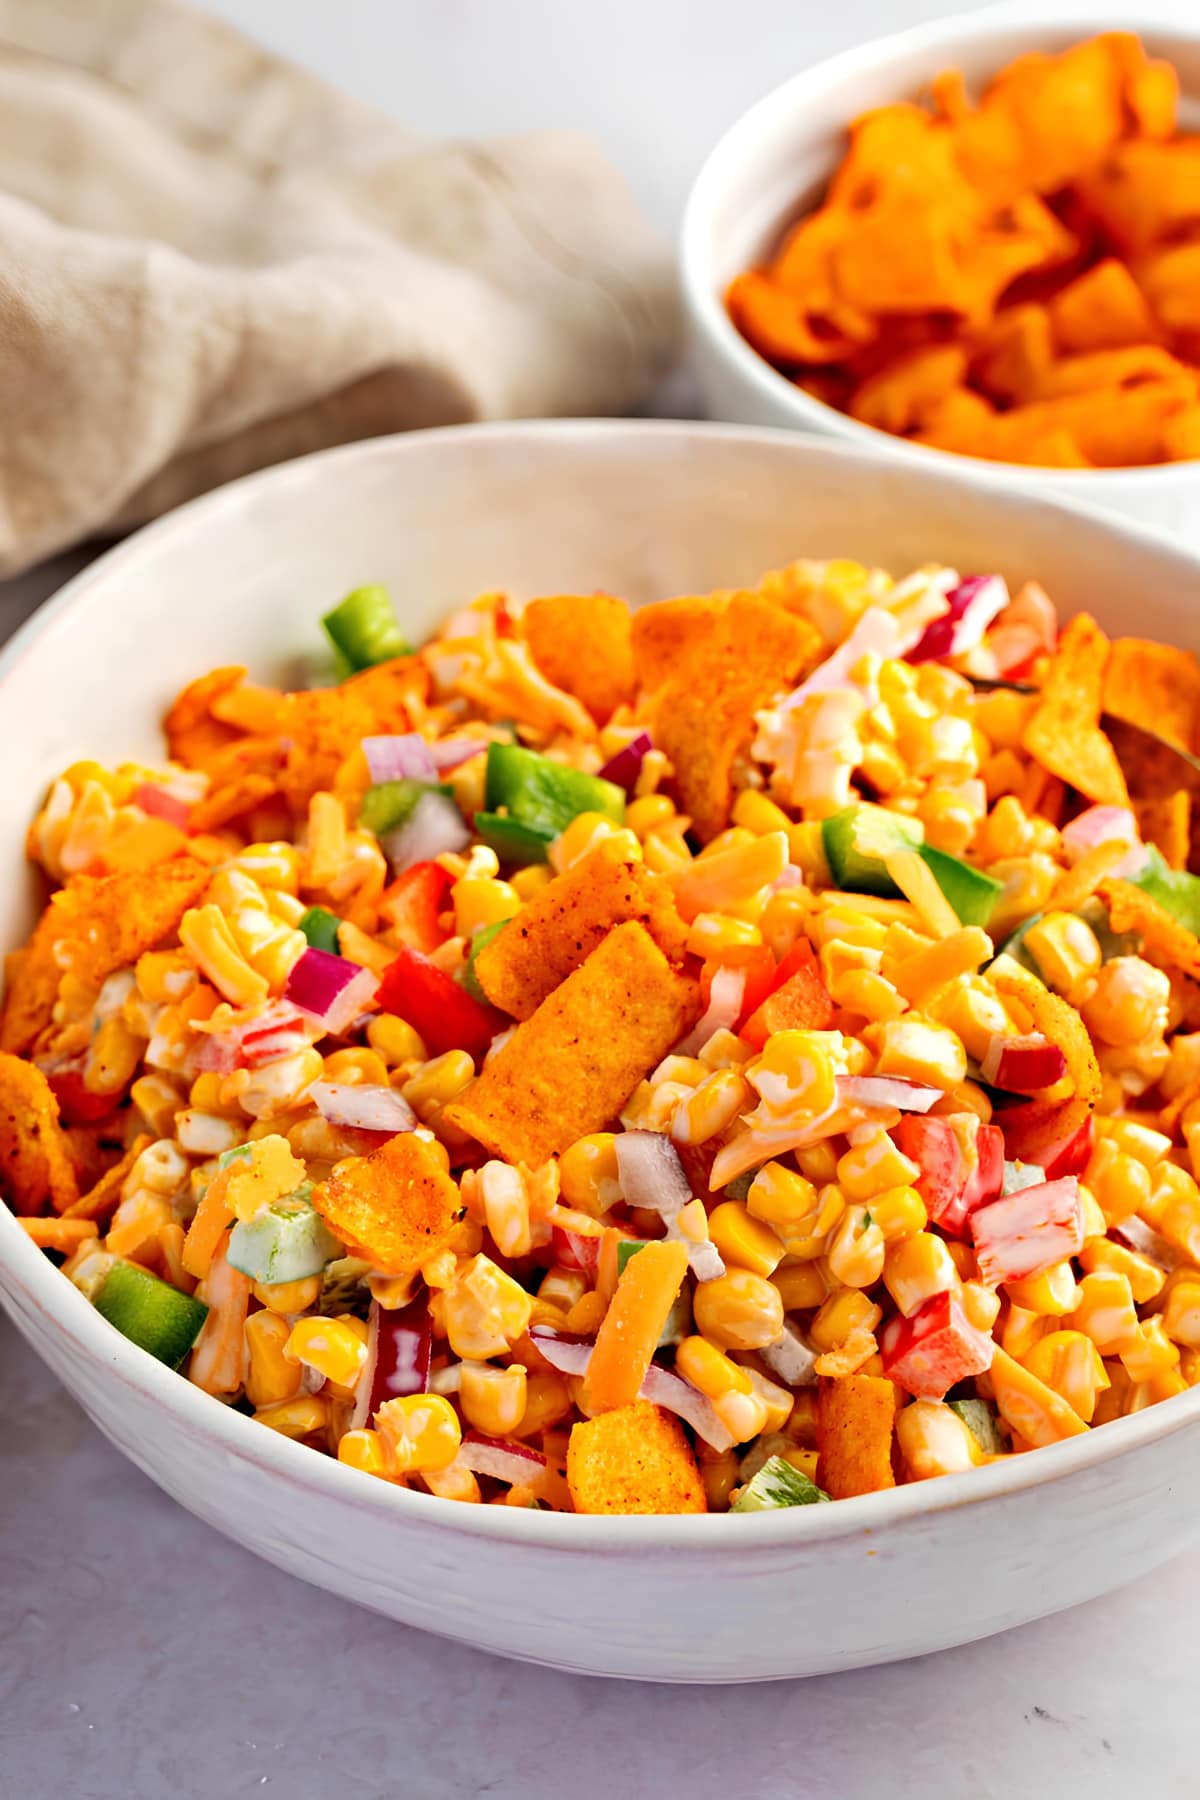 Creamy and Appetizing Frito Corn Salad with Vegetables in a Bowl